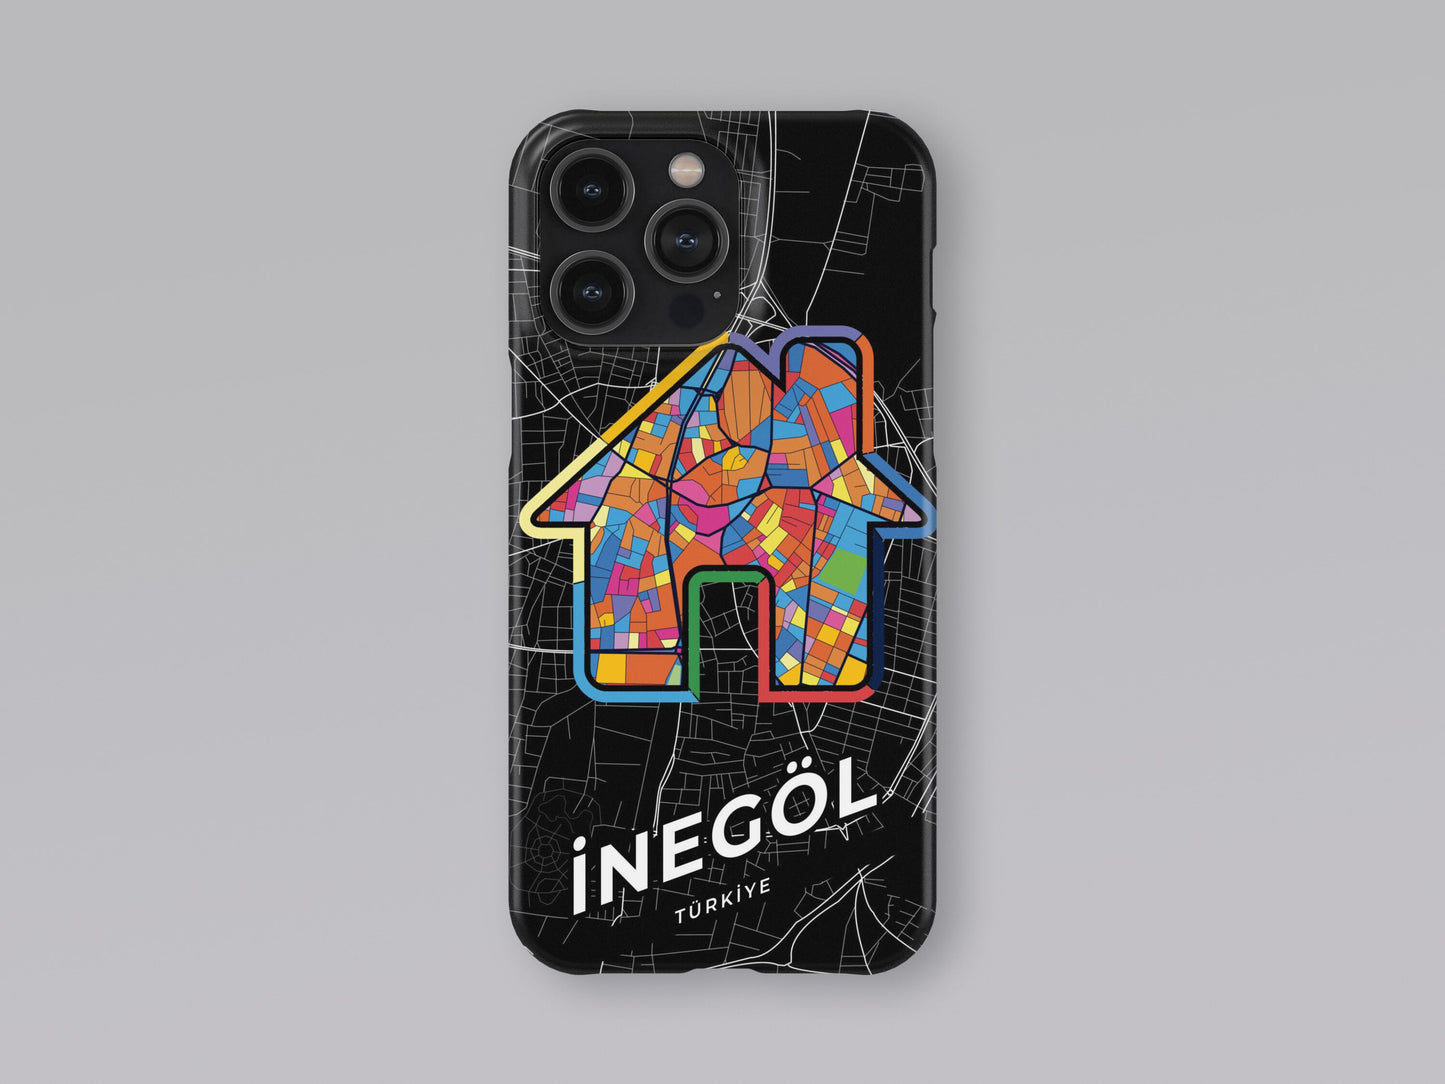 İnegöl Turkey slim phone case with colorful icon. Birthday, wedding or housewarming gift. Couple match cases. 3